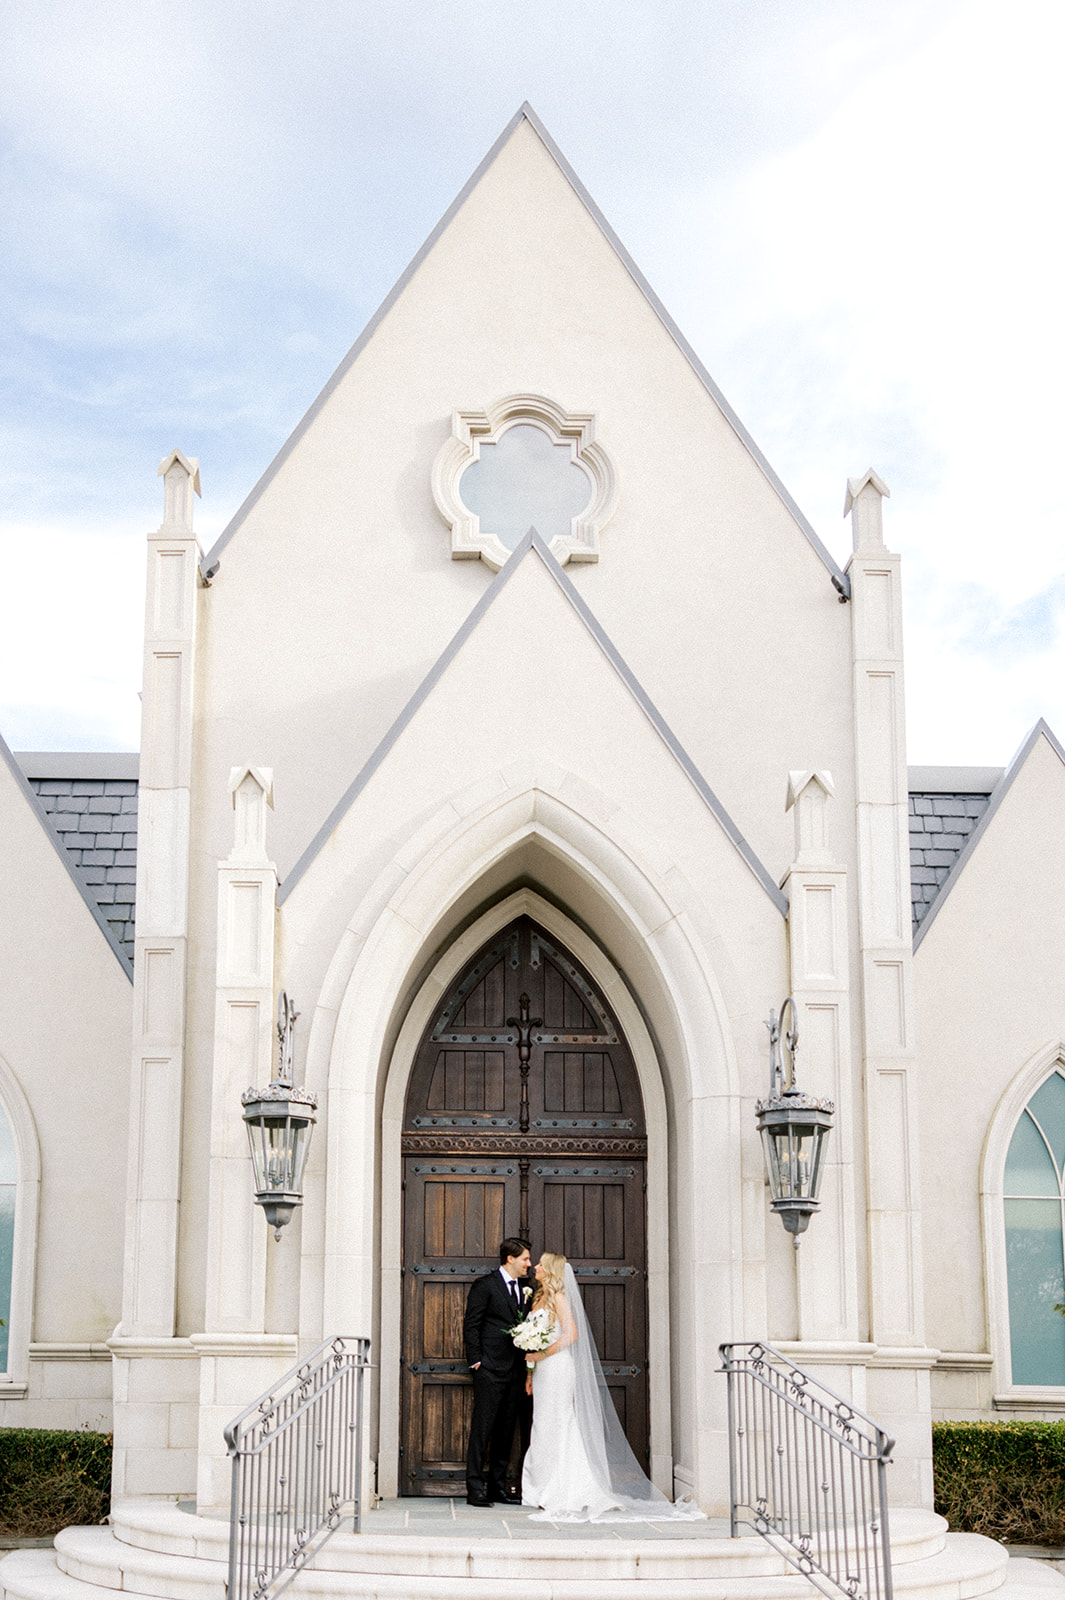 Bride and groom photos at Park Chateau wedding chapel